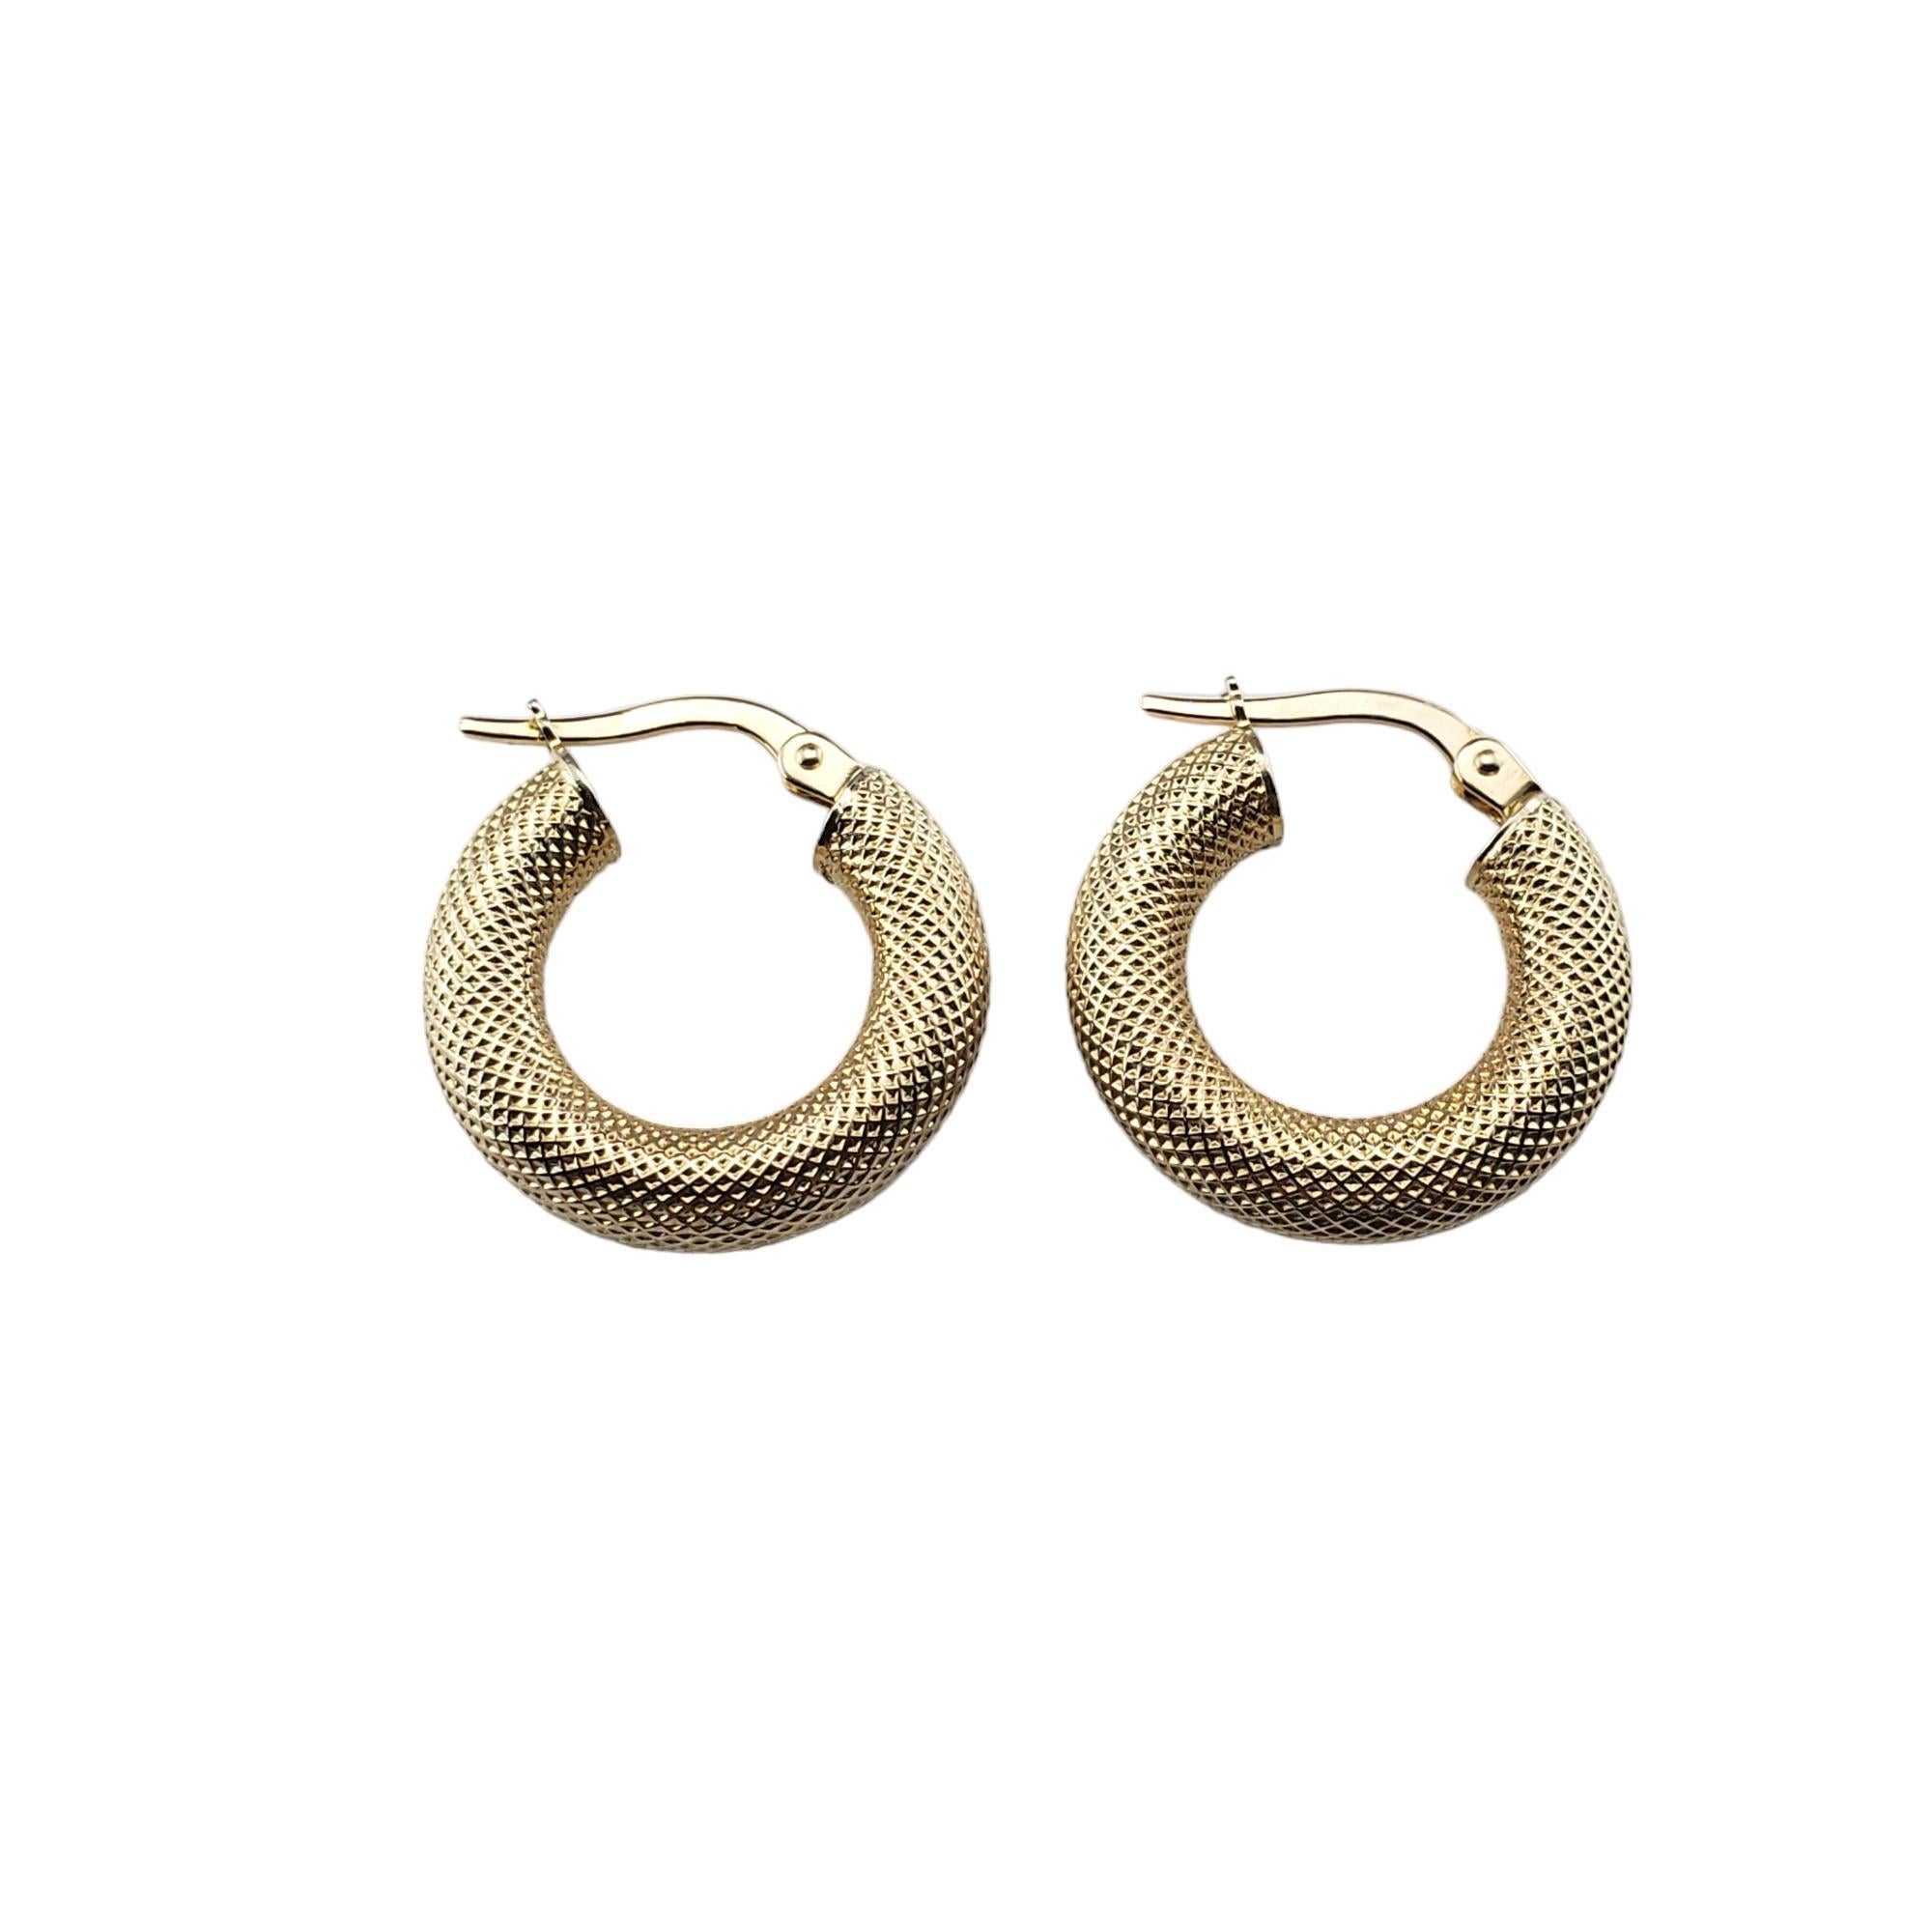 Vintage 14K Yellow Gold Textured Hoop Earrings-

These elegant hoop earrings are crafted in meticulously detailed 14K yellow gold.  Width: 4 mm.

Size: 19 mm

Stamped: 14K Italy

Weight: 2.6 gr./ 1.6 dwt.

Very good condition, professionally